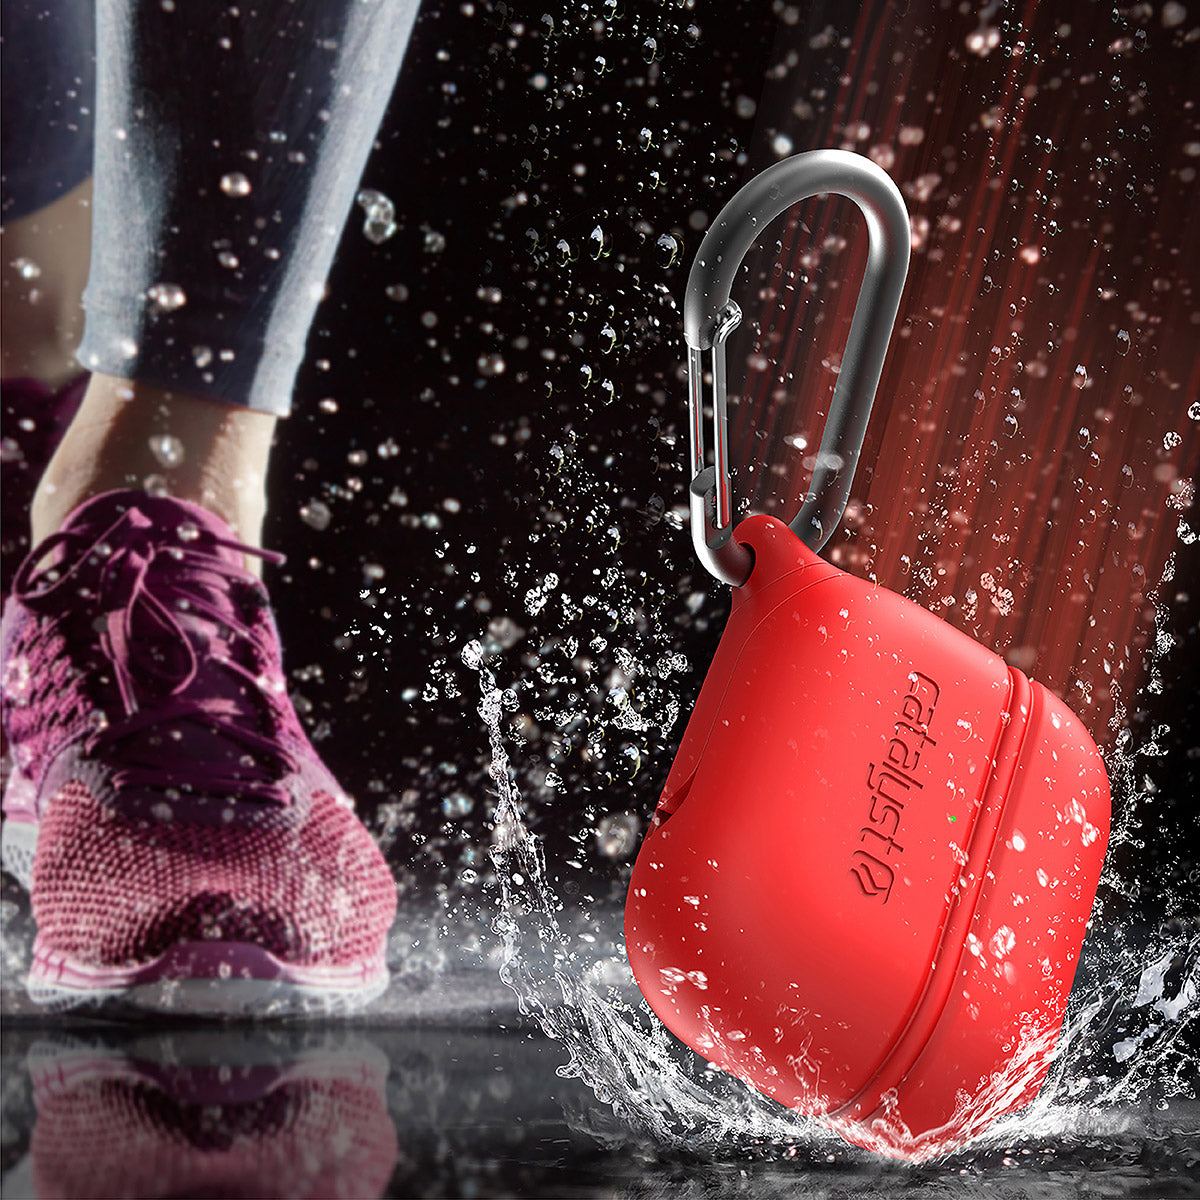 catalyst airpods pro gen 2 1 waterproof case carabiner special edition red dropped and splashes of water running shoes